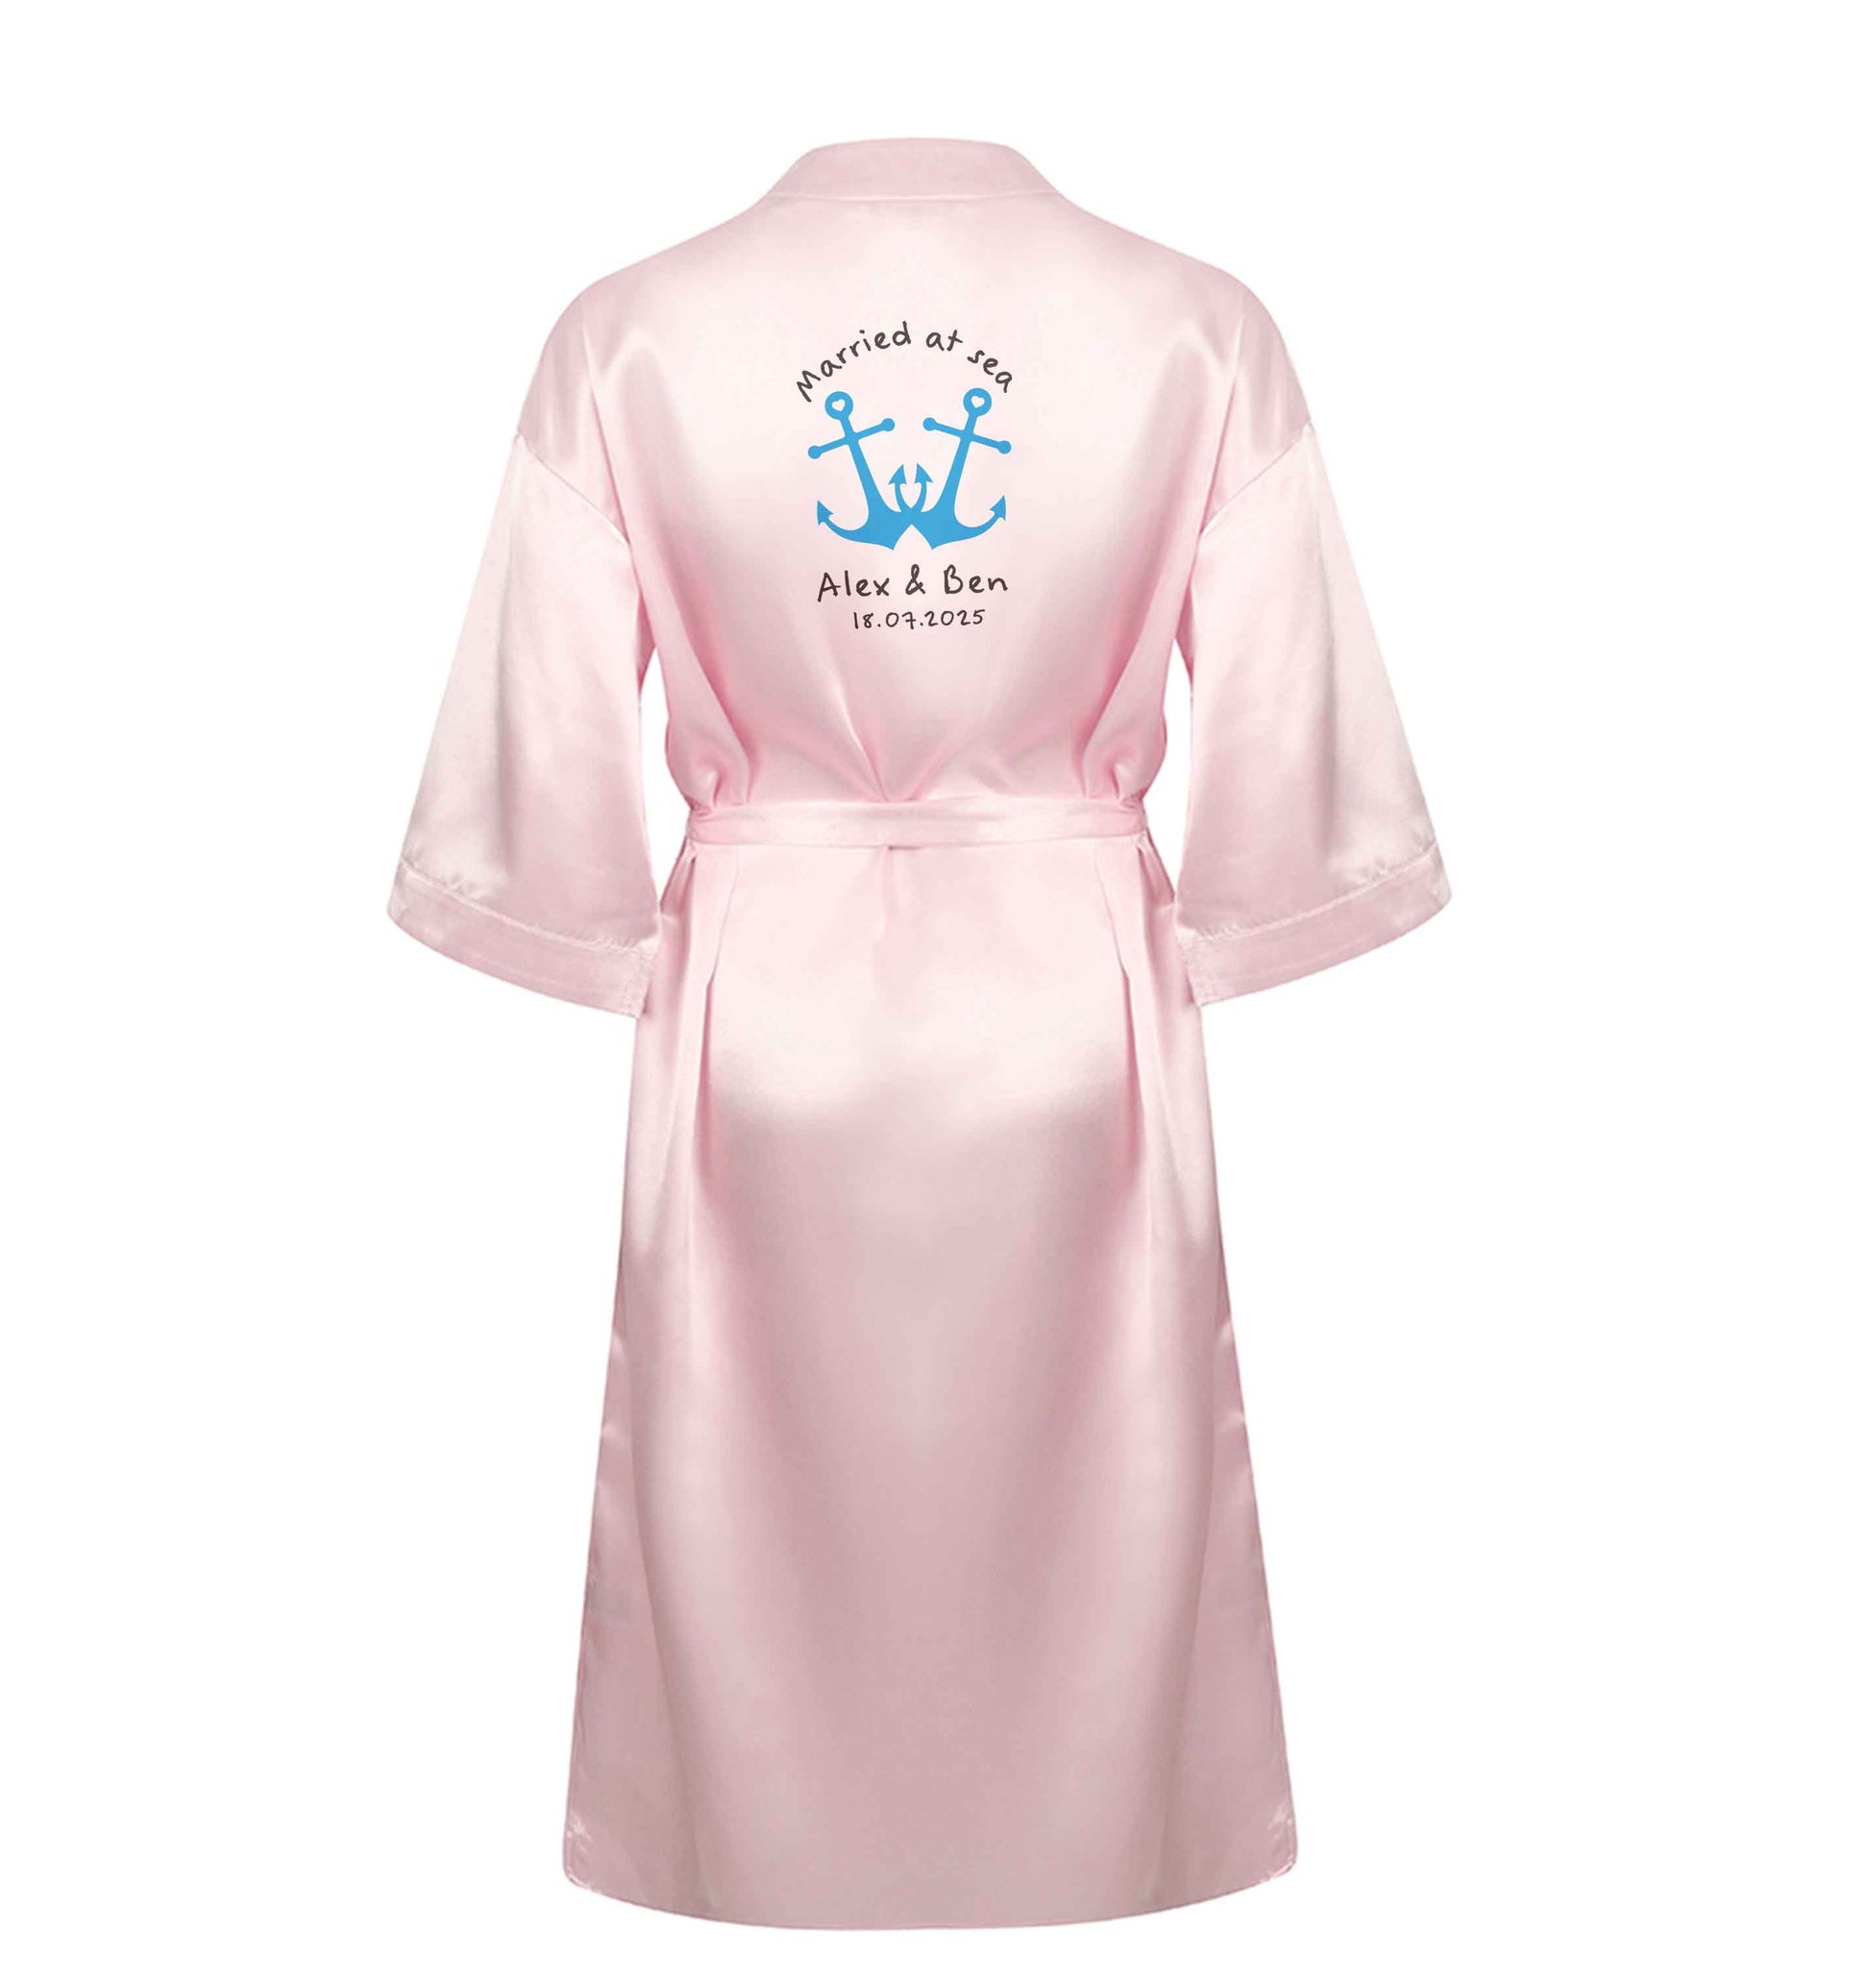 Married at sea blue anchors XL/XXL pink ladies dressing gown size 16/18